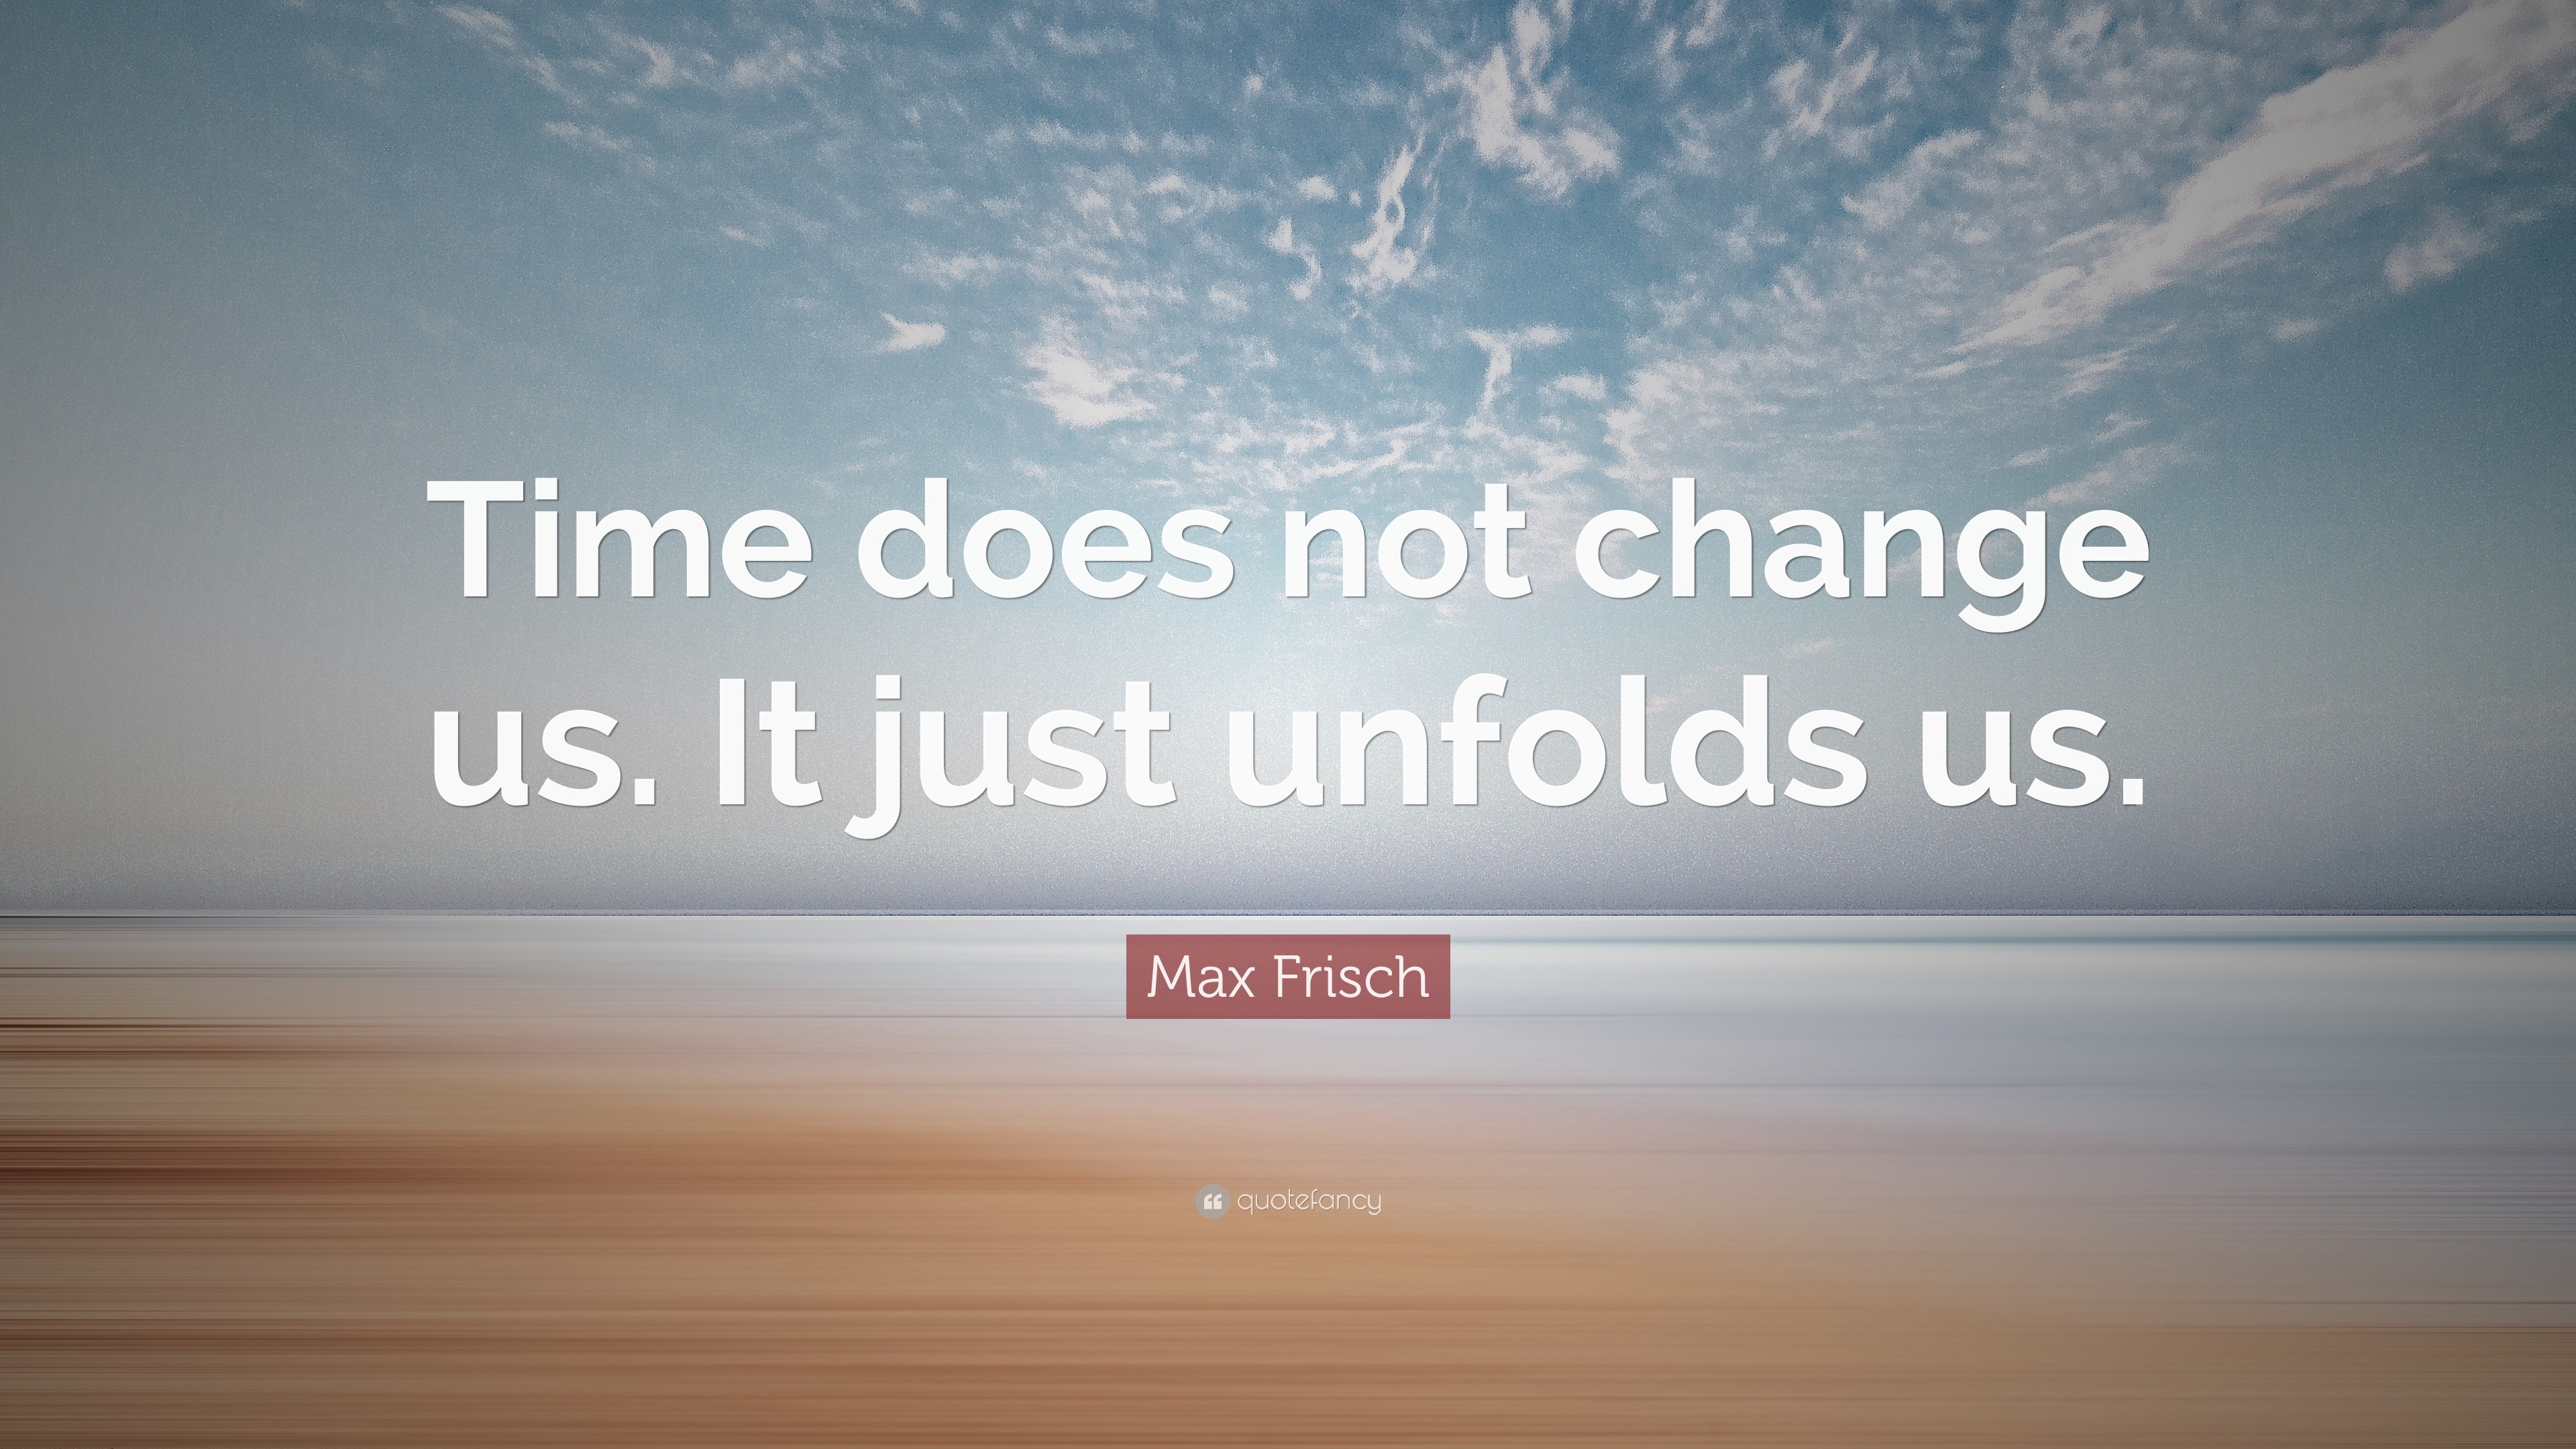 Max Frisch Quote: “Time does not change us. It just unfolds us.”